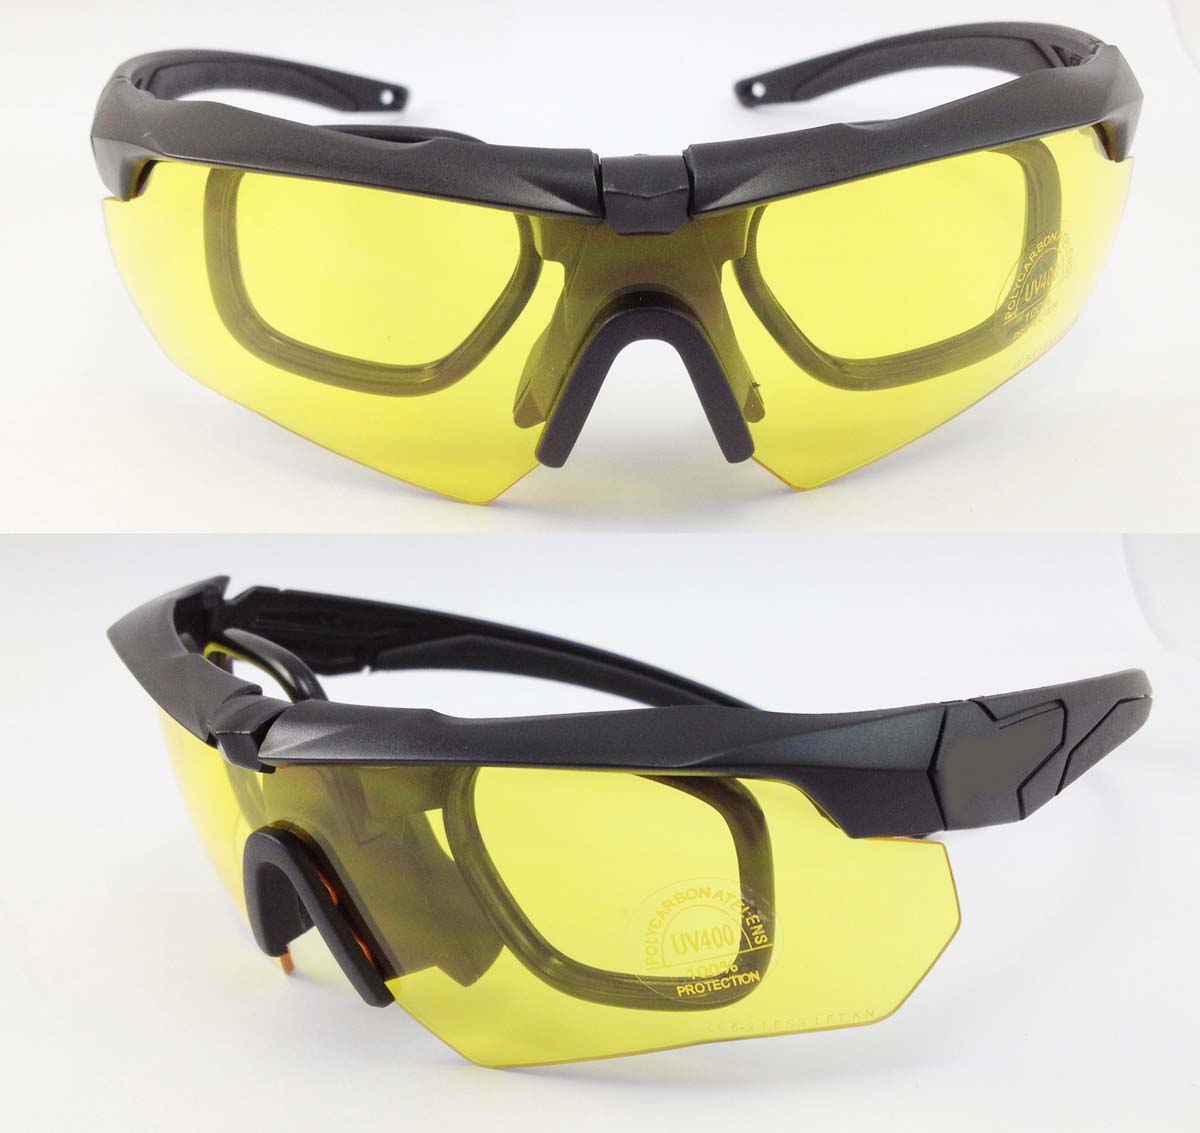 Ultra light thick temple cycling sunglasses with 3 interchangeable color lenses